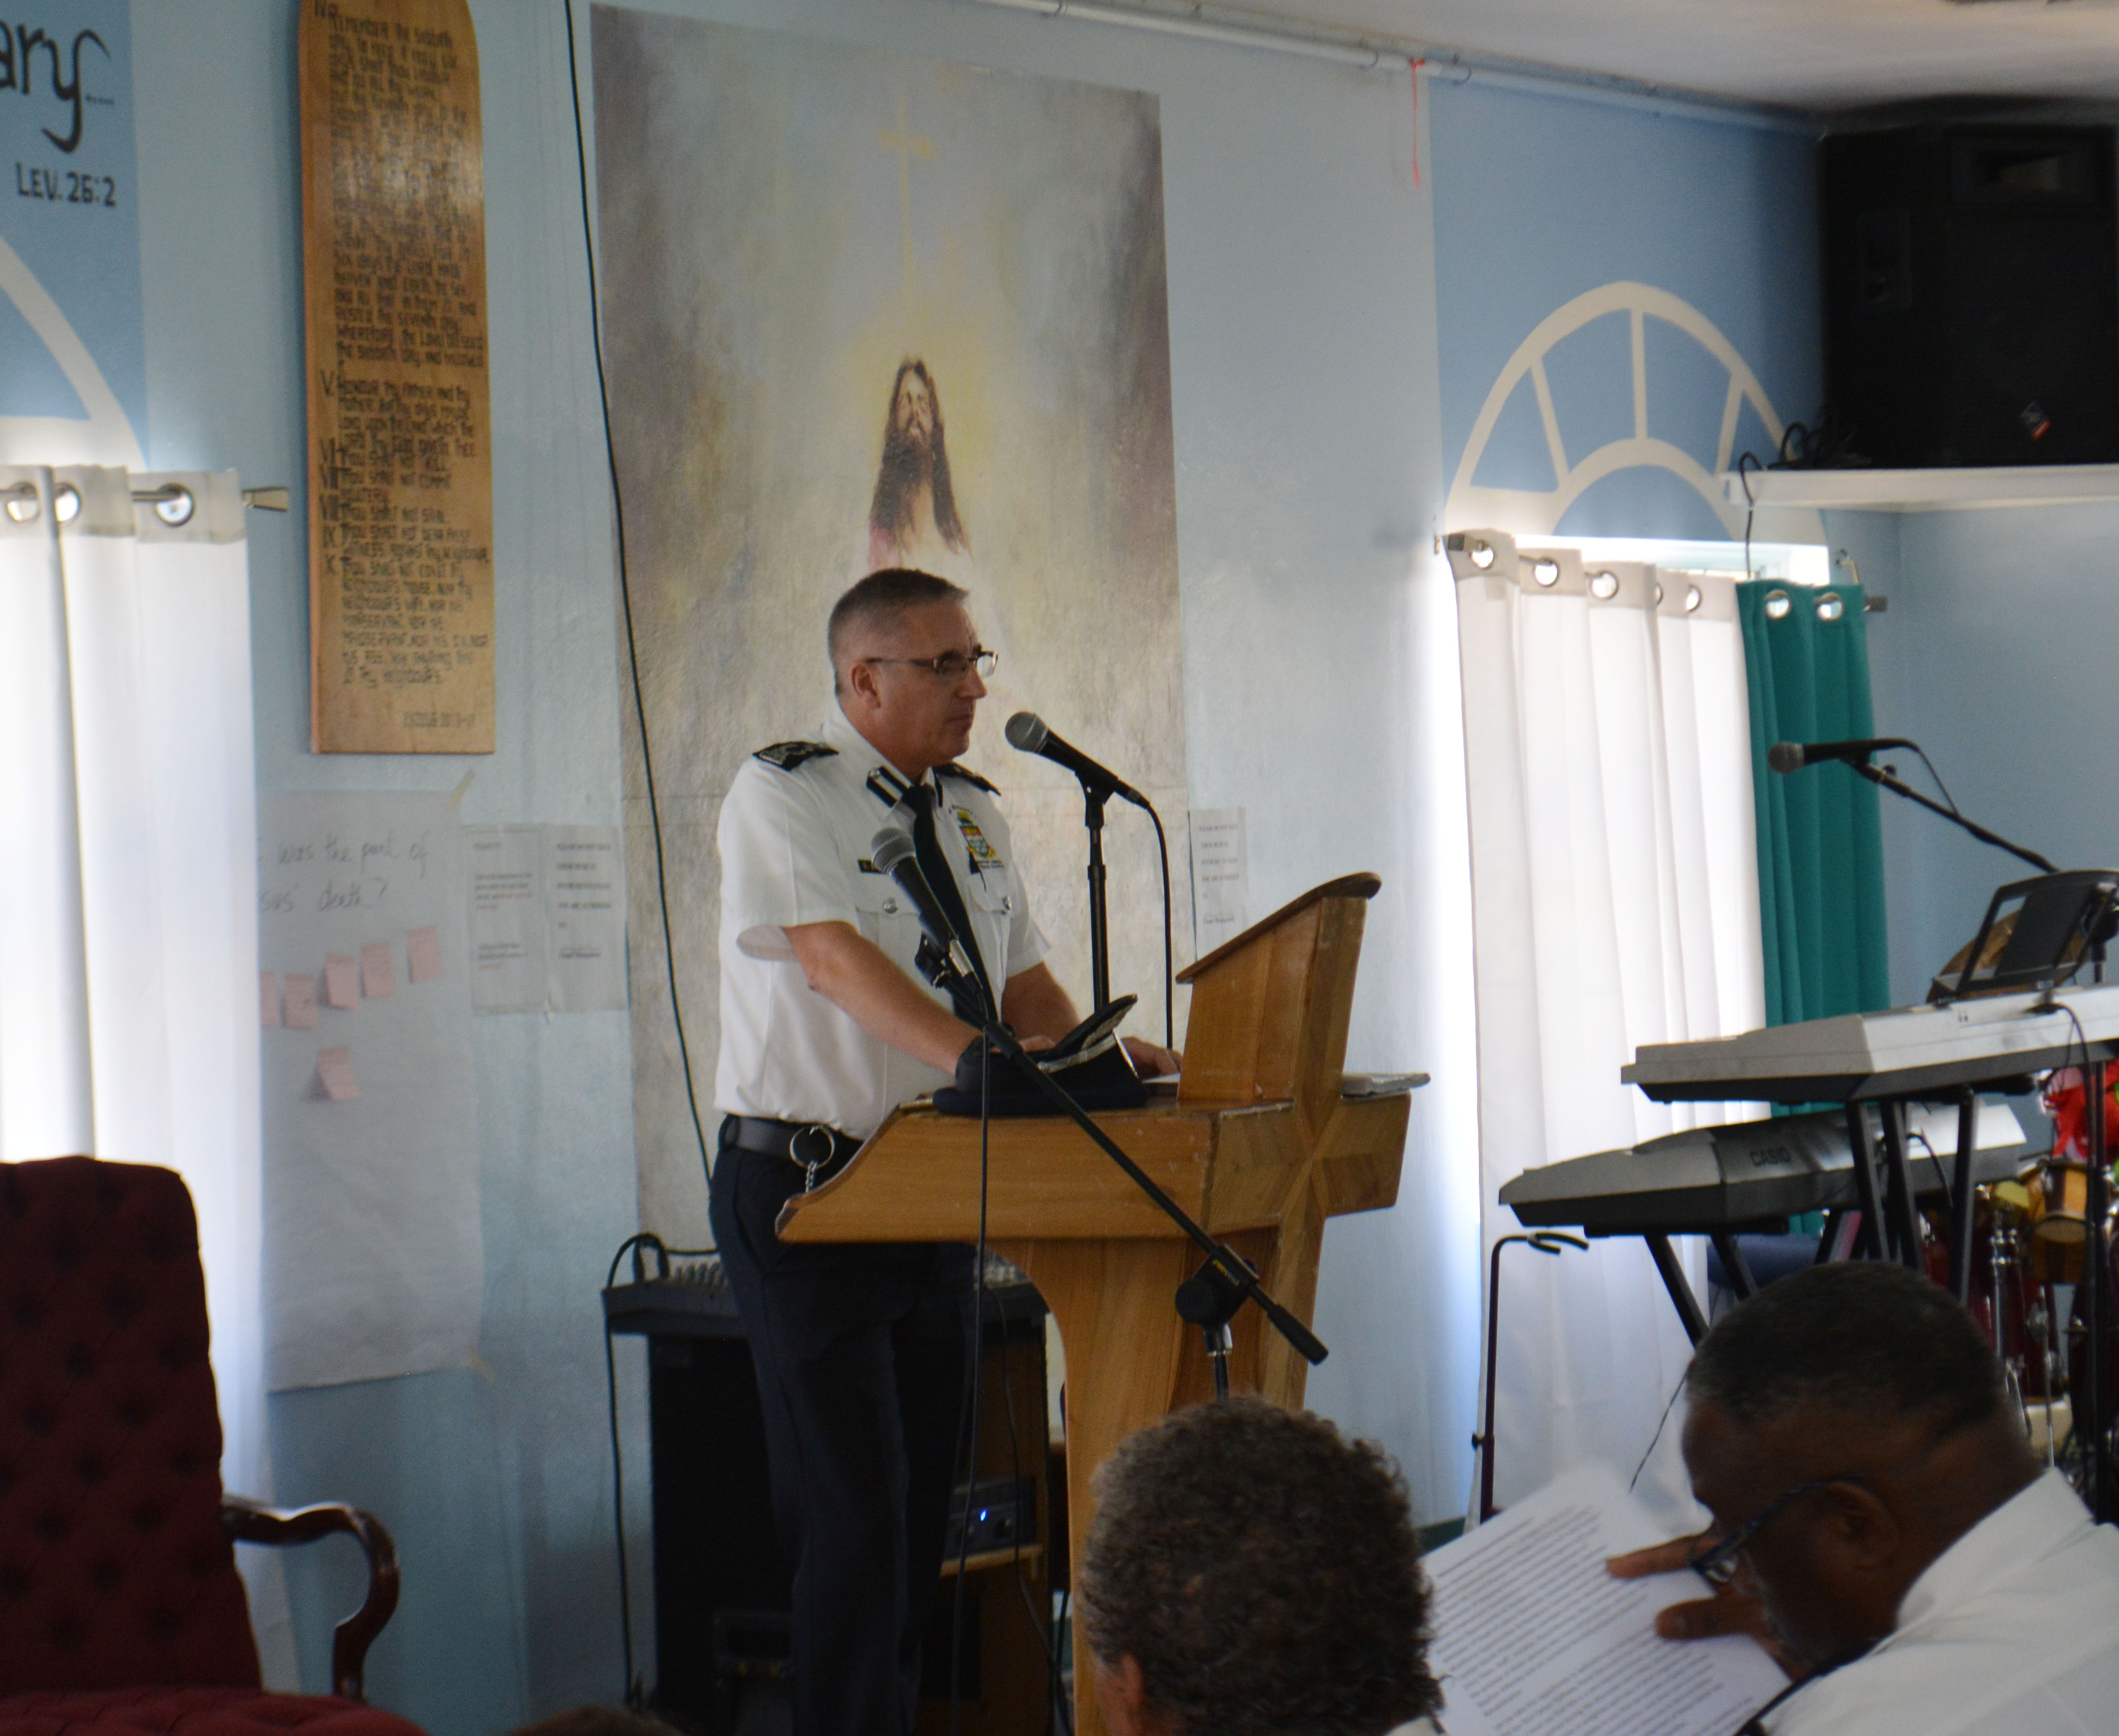 Director of HMCIPS, Steven Barrett speaks to inmates ahead of the presentations